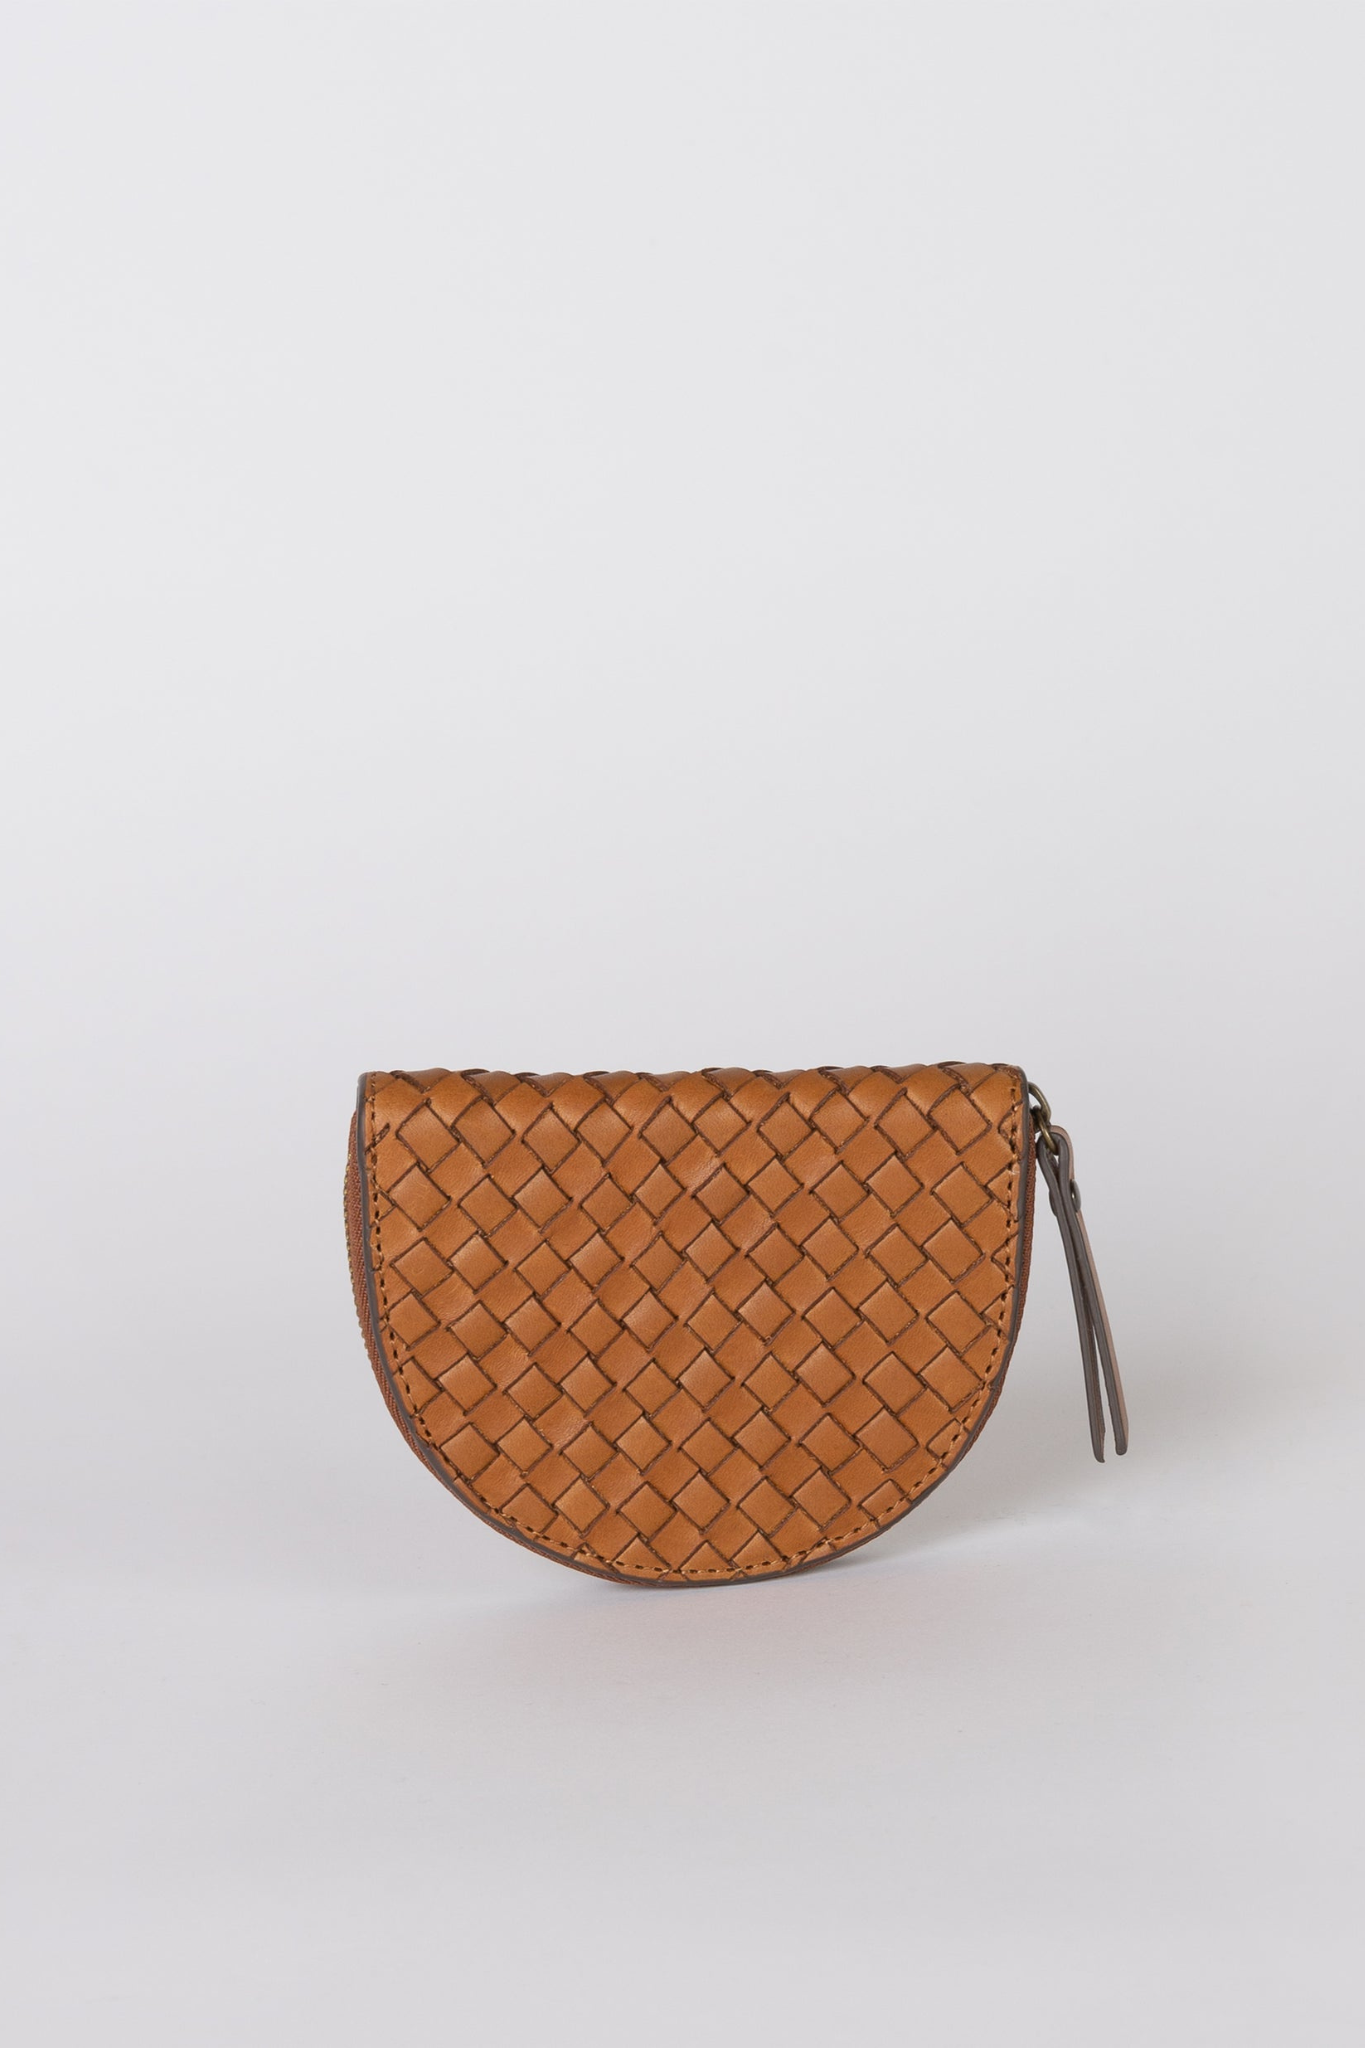 LAURA COIN PURSE - COGNAC WOVEN CLASSIC LEATHER